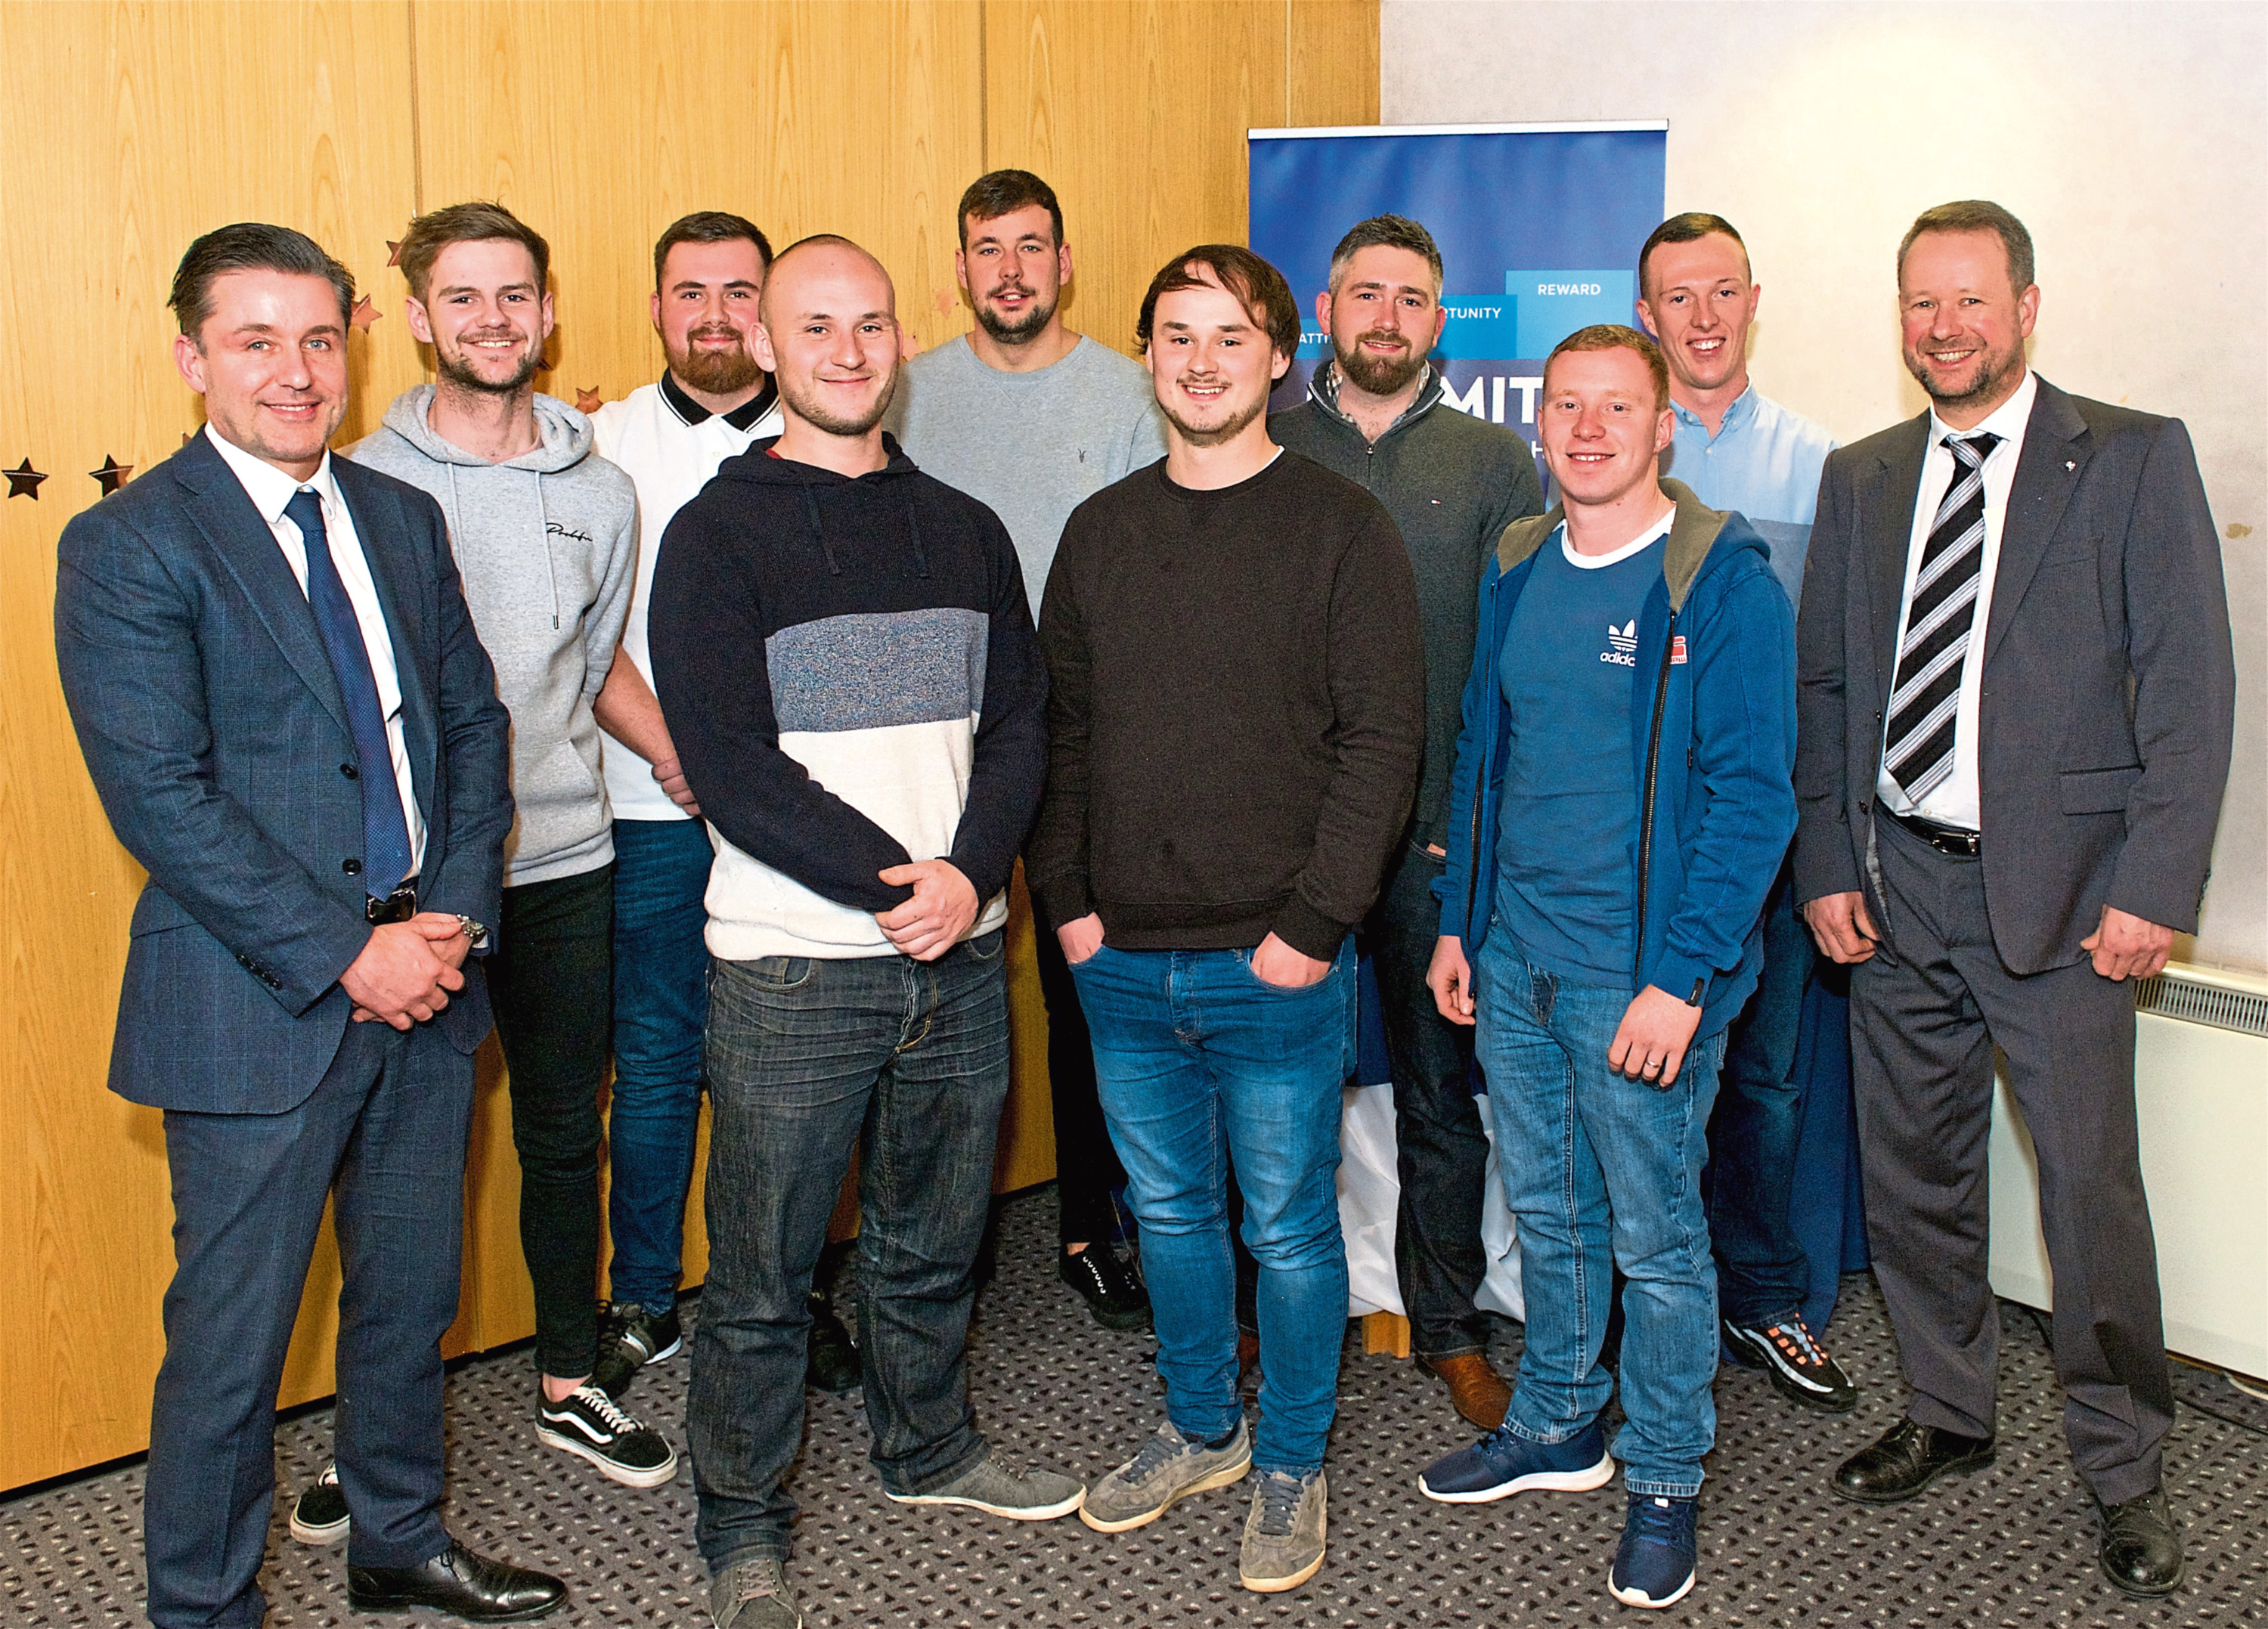 (far left) Ian Macfarlane, Managing Director at CR Smith pictured with CR Smith Apprentices and Frazer Walker, Lecturer at Fife College (far right) 

CR Smith Joinery Apprenticeship Awards 2018. Dunfermline.

Rebecca Lee Photography